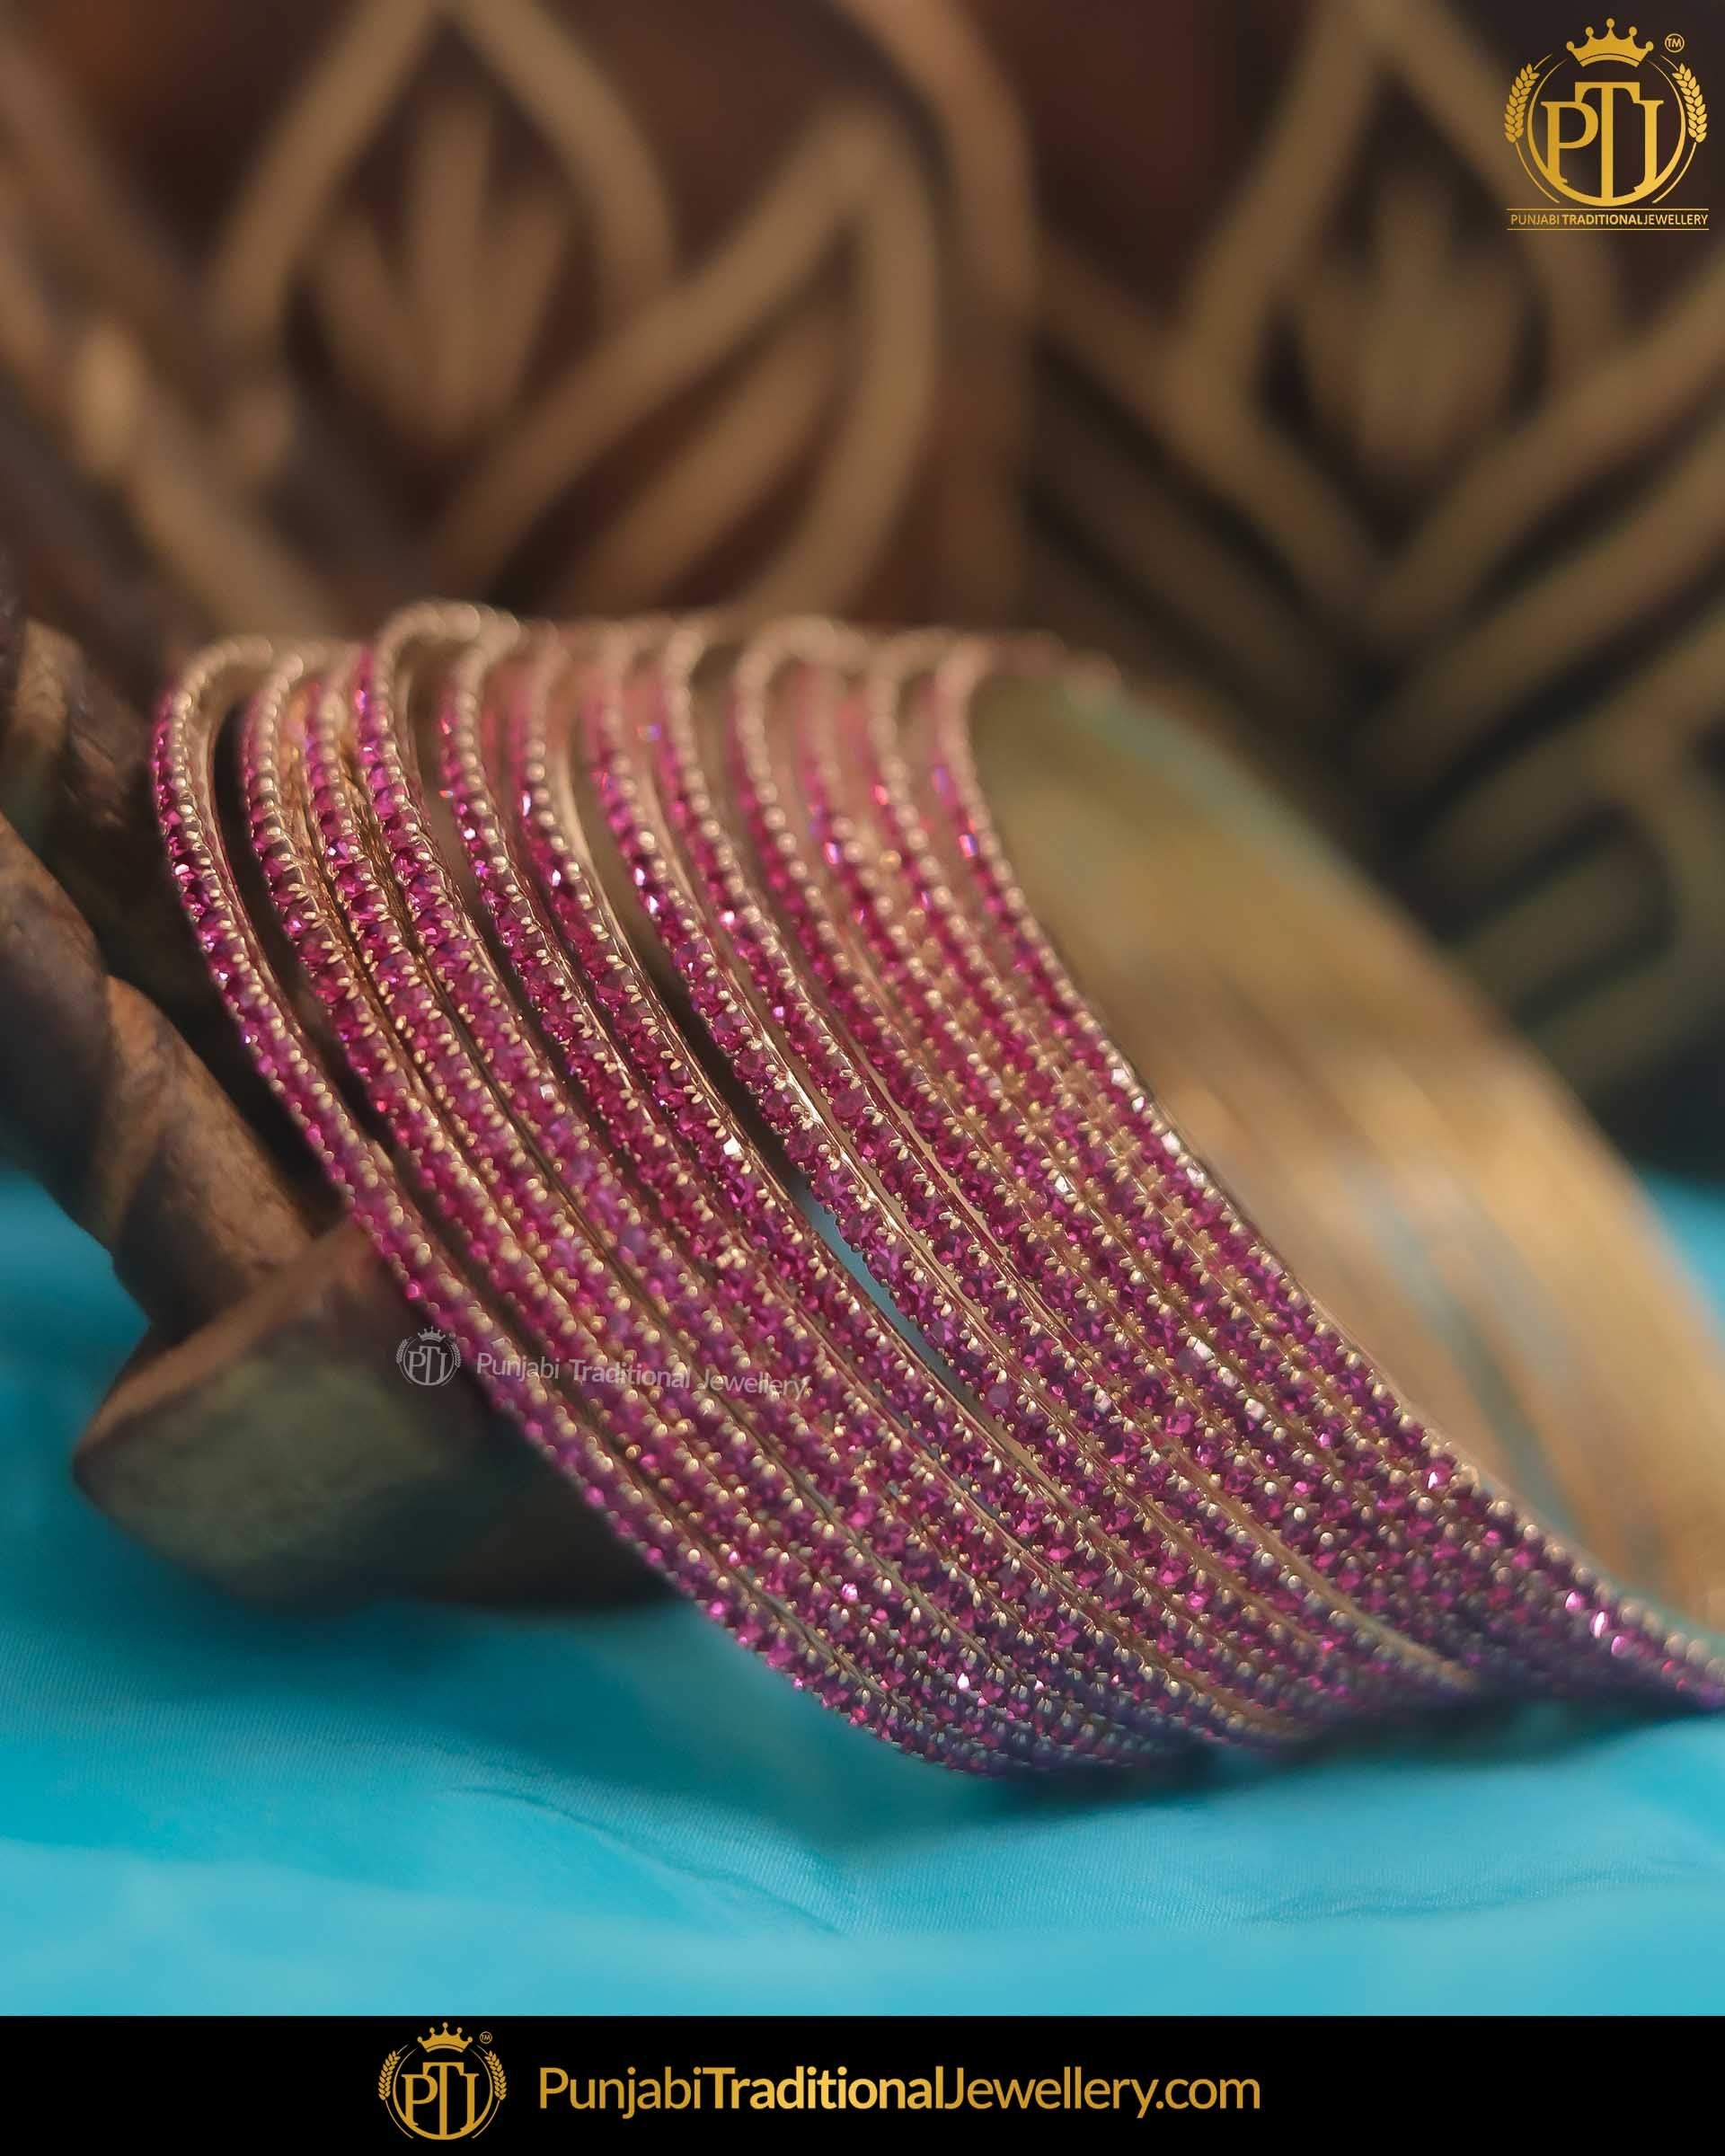 AD Stone Hot Pink Bangles (12 piece) | Punjabi Traditional Jewellery Exclusive